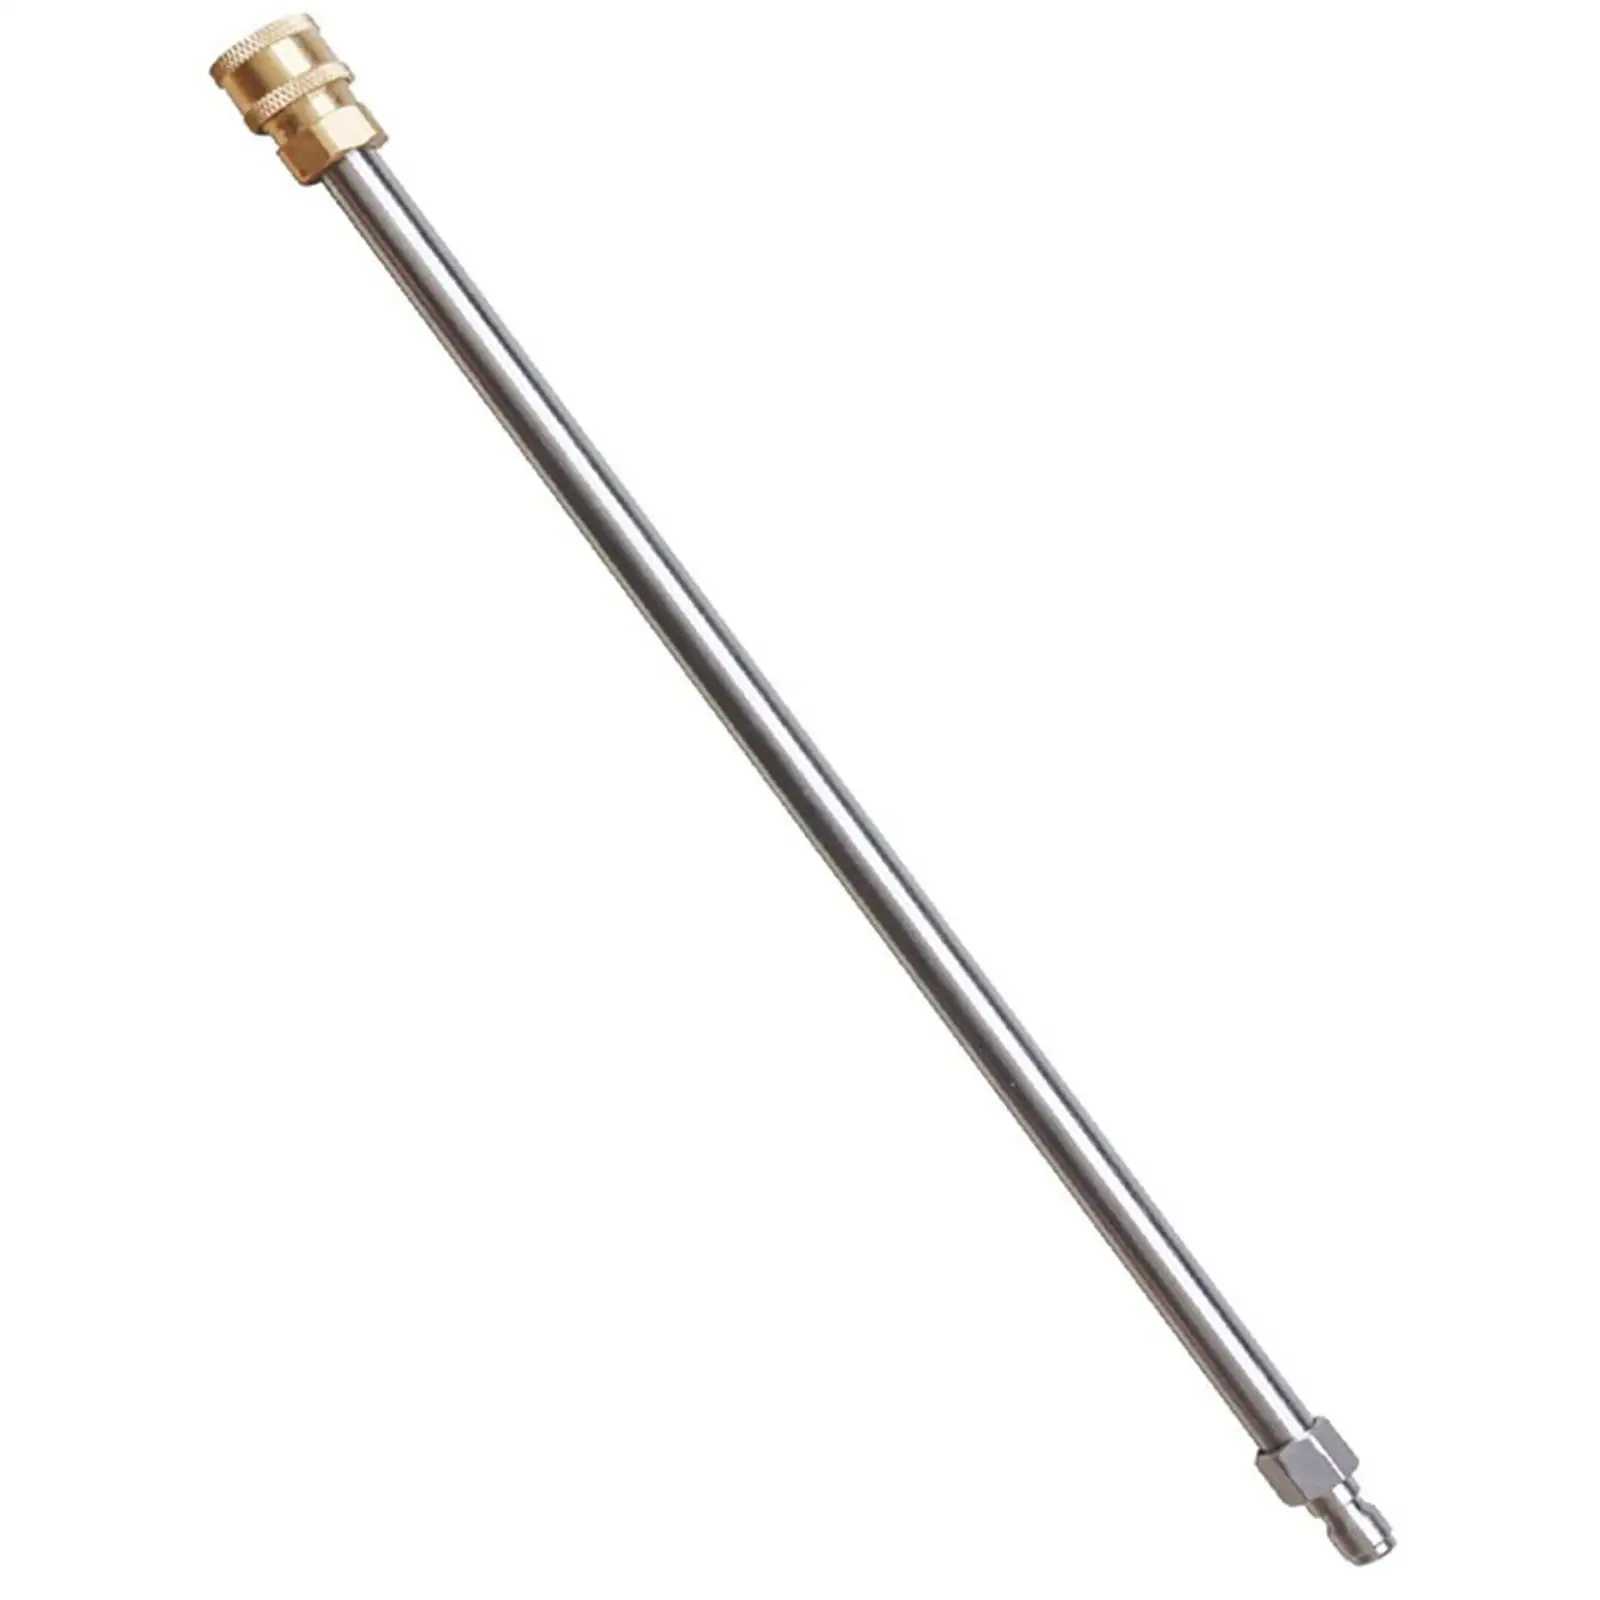 Power Washer Lance Extension Pole for Water Broom Undercarriage Cleaner Roof